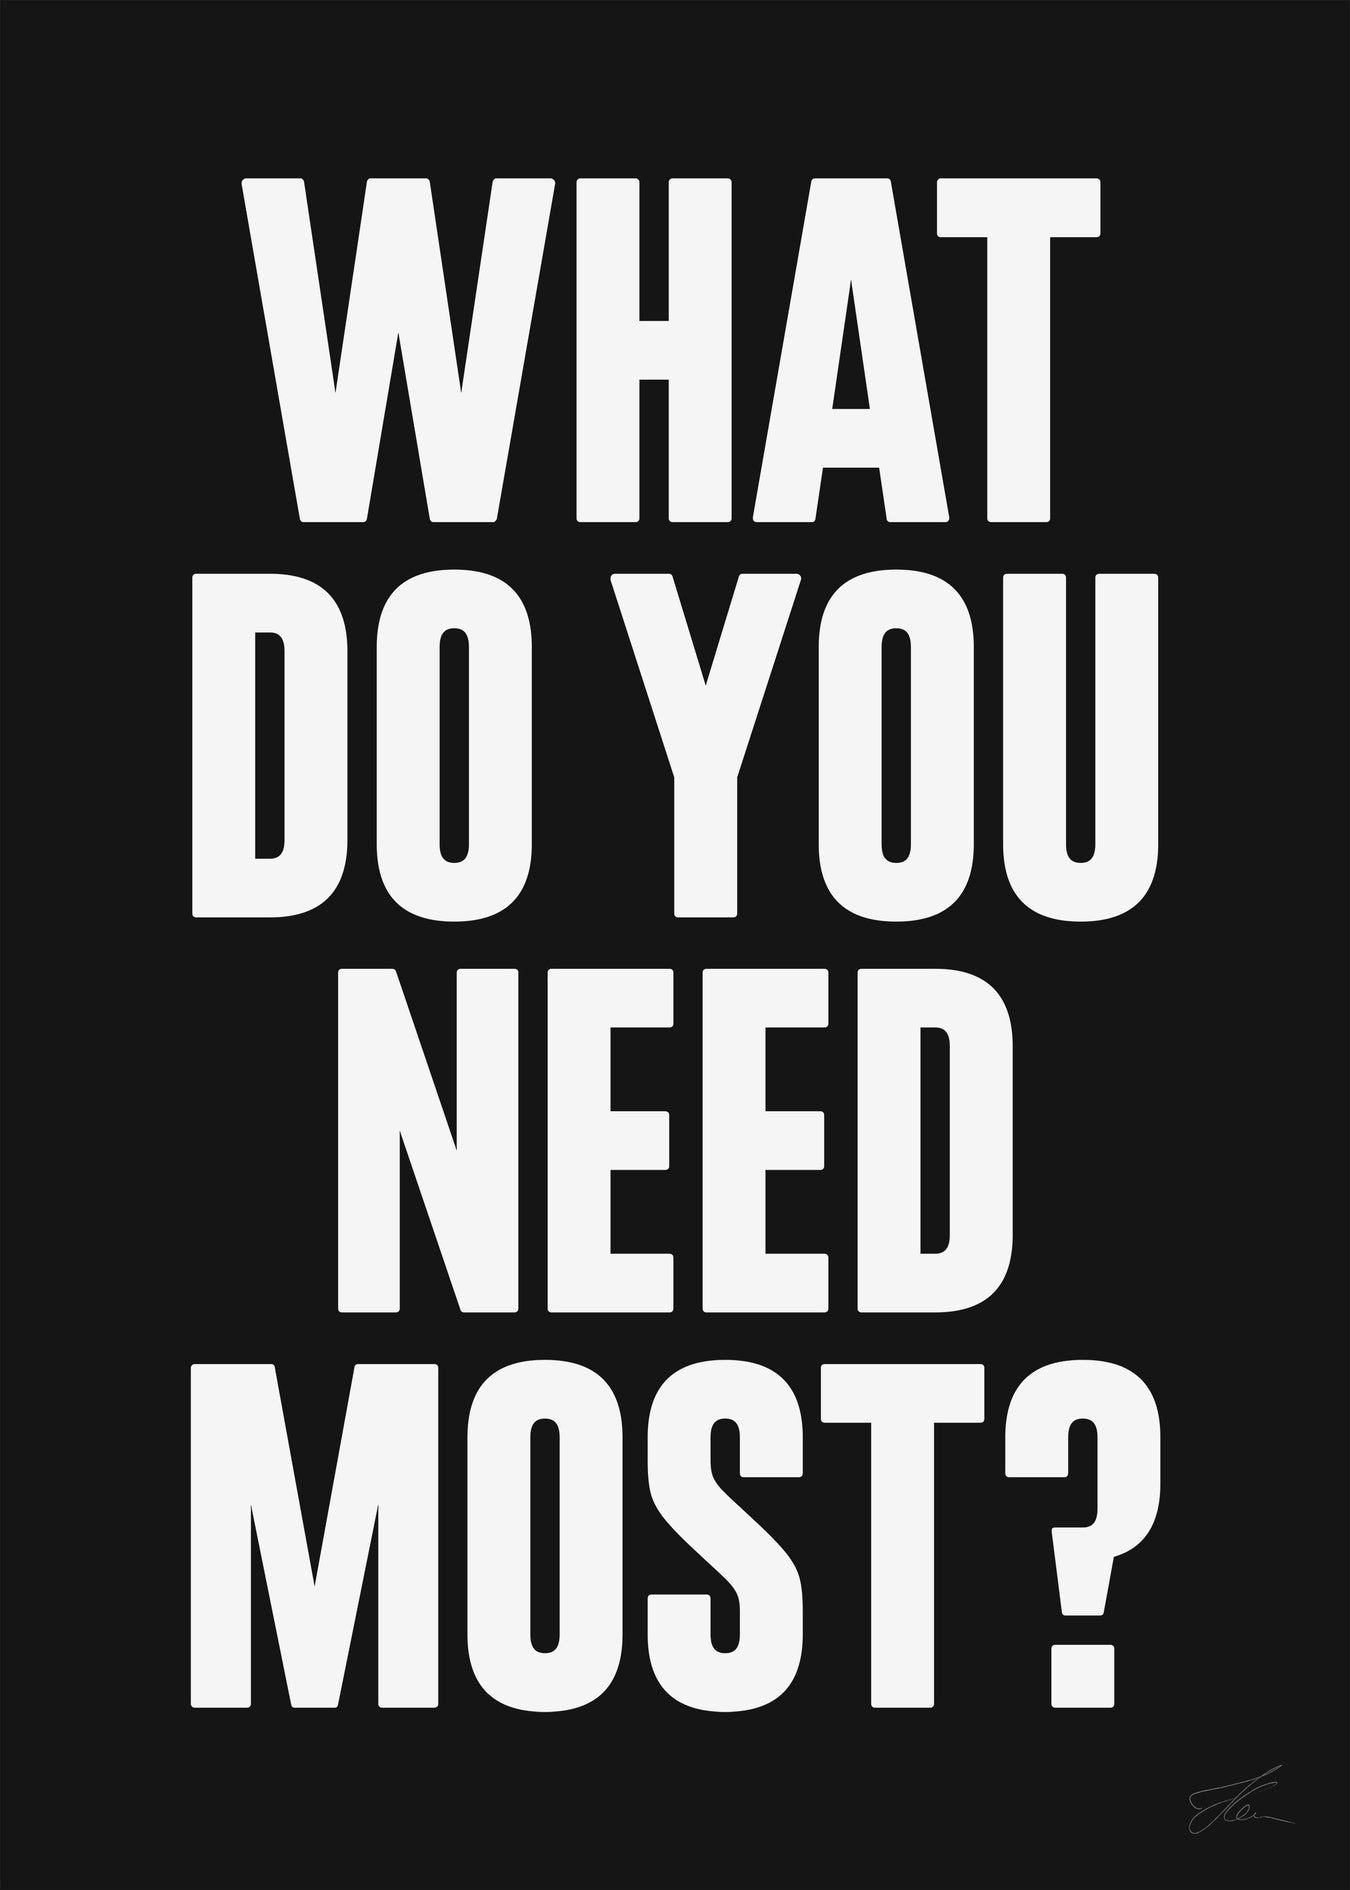 What do you need most? (WB)